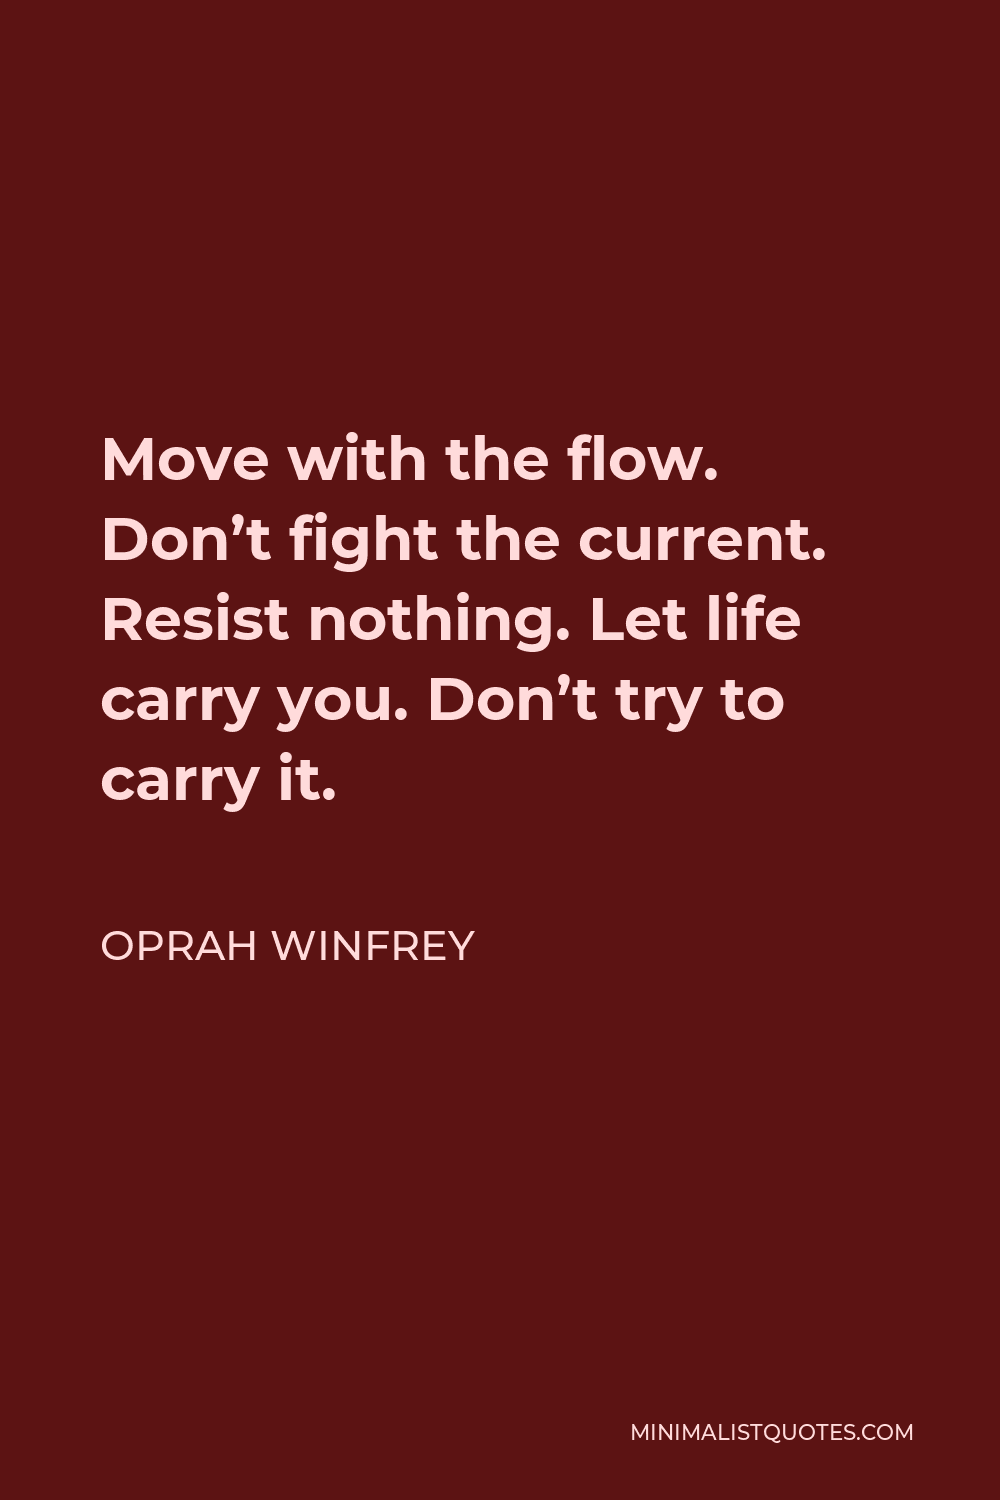 Oprah Winfrey Quote - Move with the flow. Don’t fight the current. Resist nothing. Let life carry you. Don’t try to carry it.